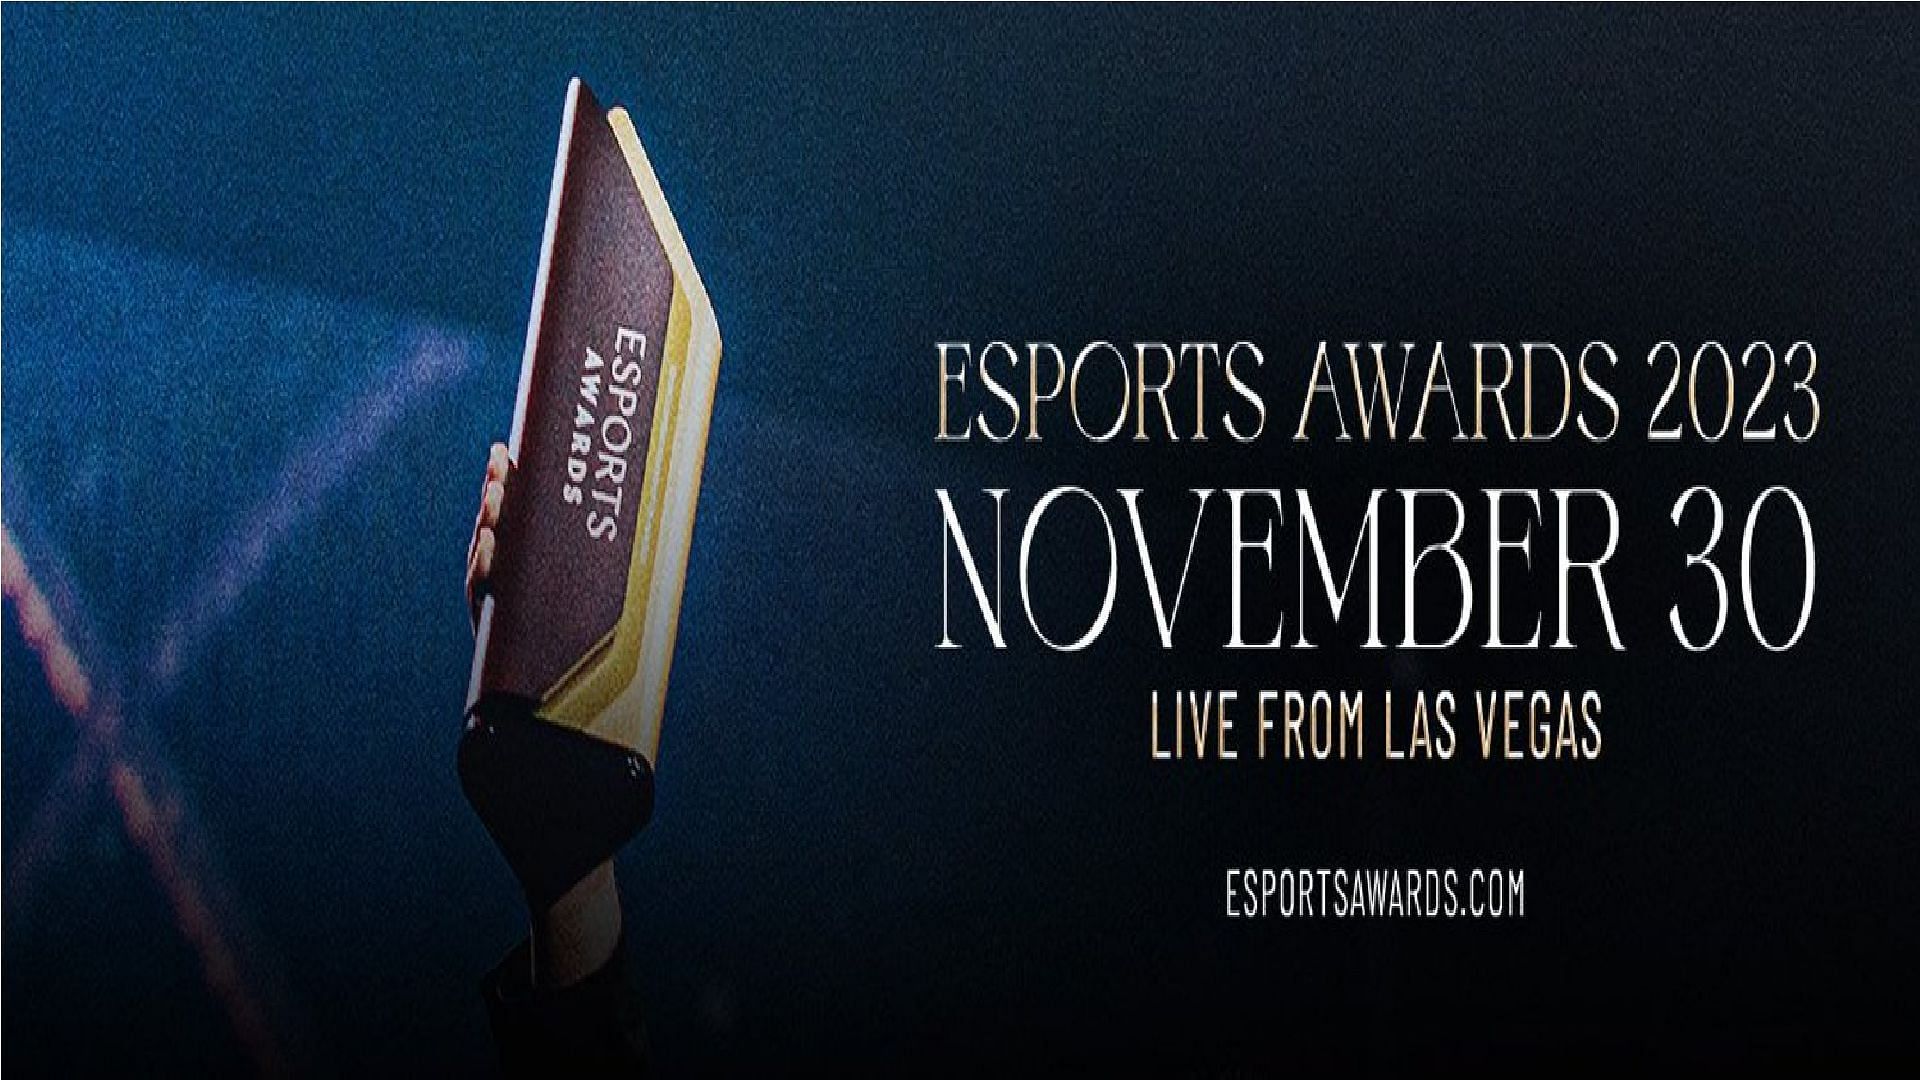 S8UL Esports and MortaL have been nominated for Esports Awards 2023